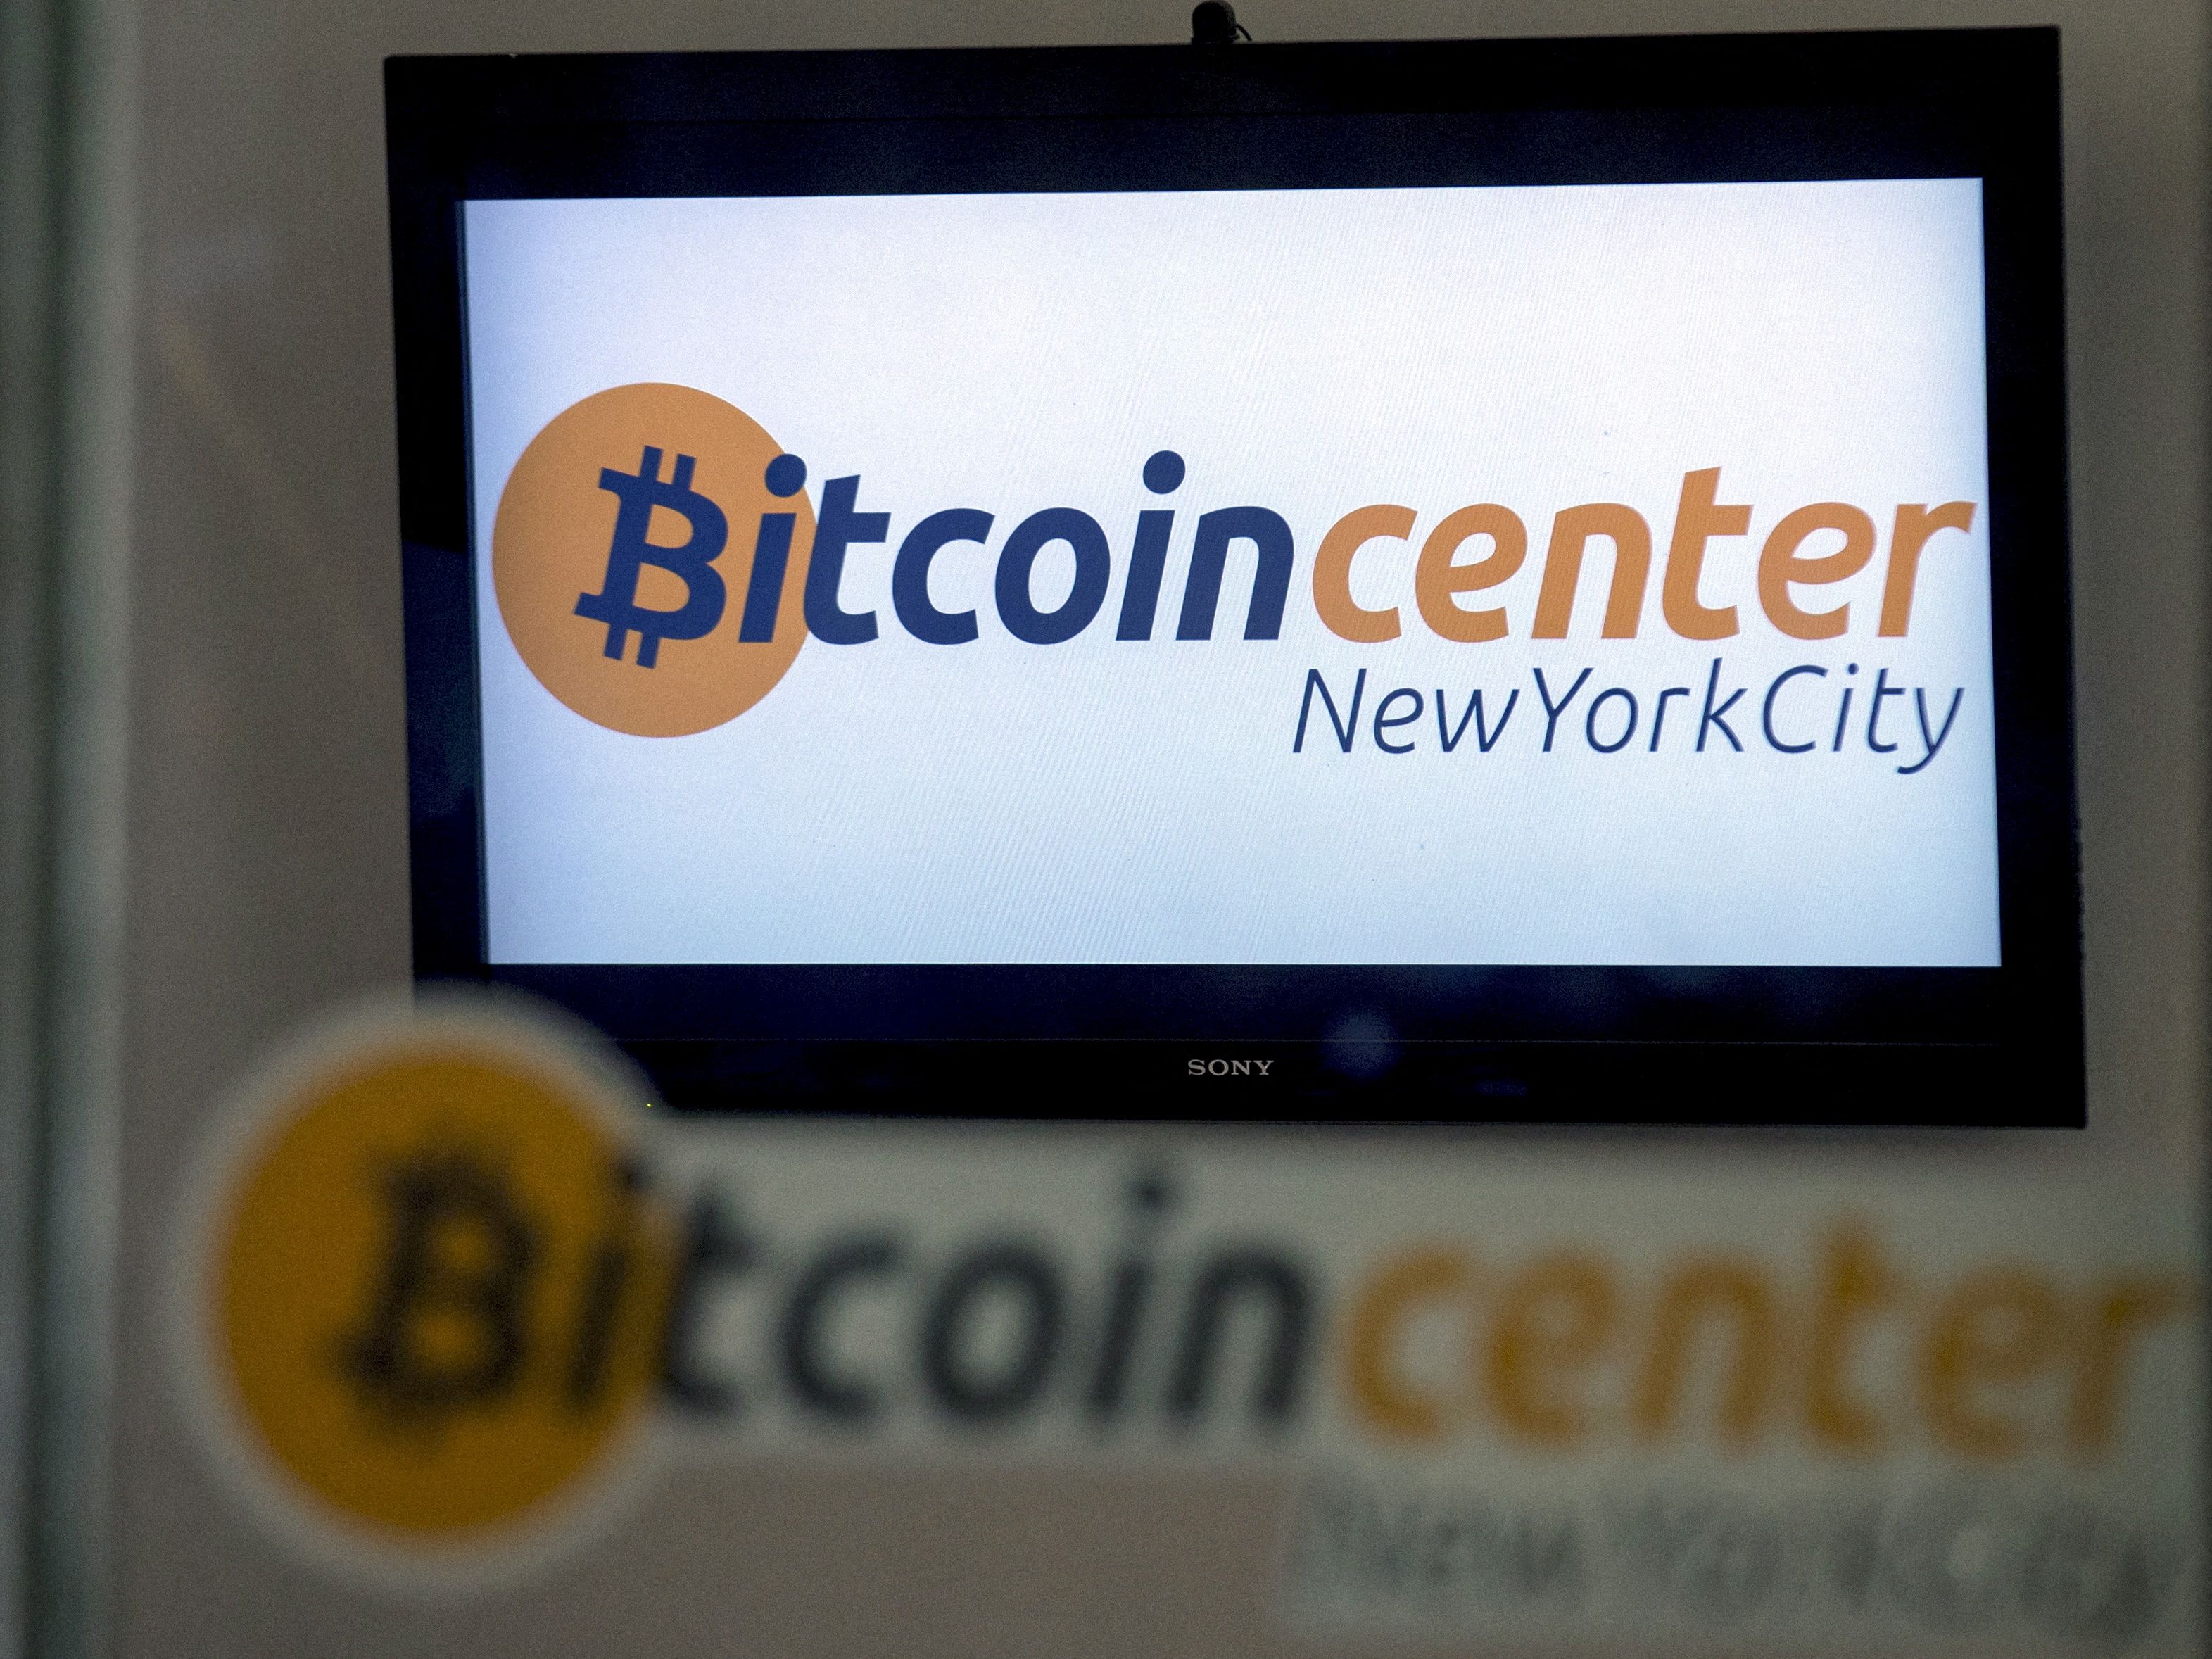 A Bitcoin logo is displayed on a screen inside the Bitcoin Center New York City in New York's financial district